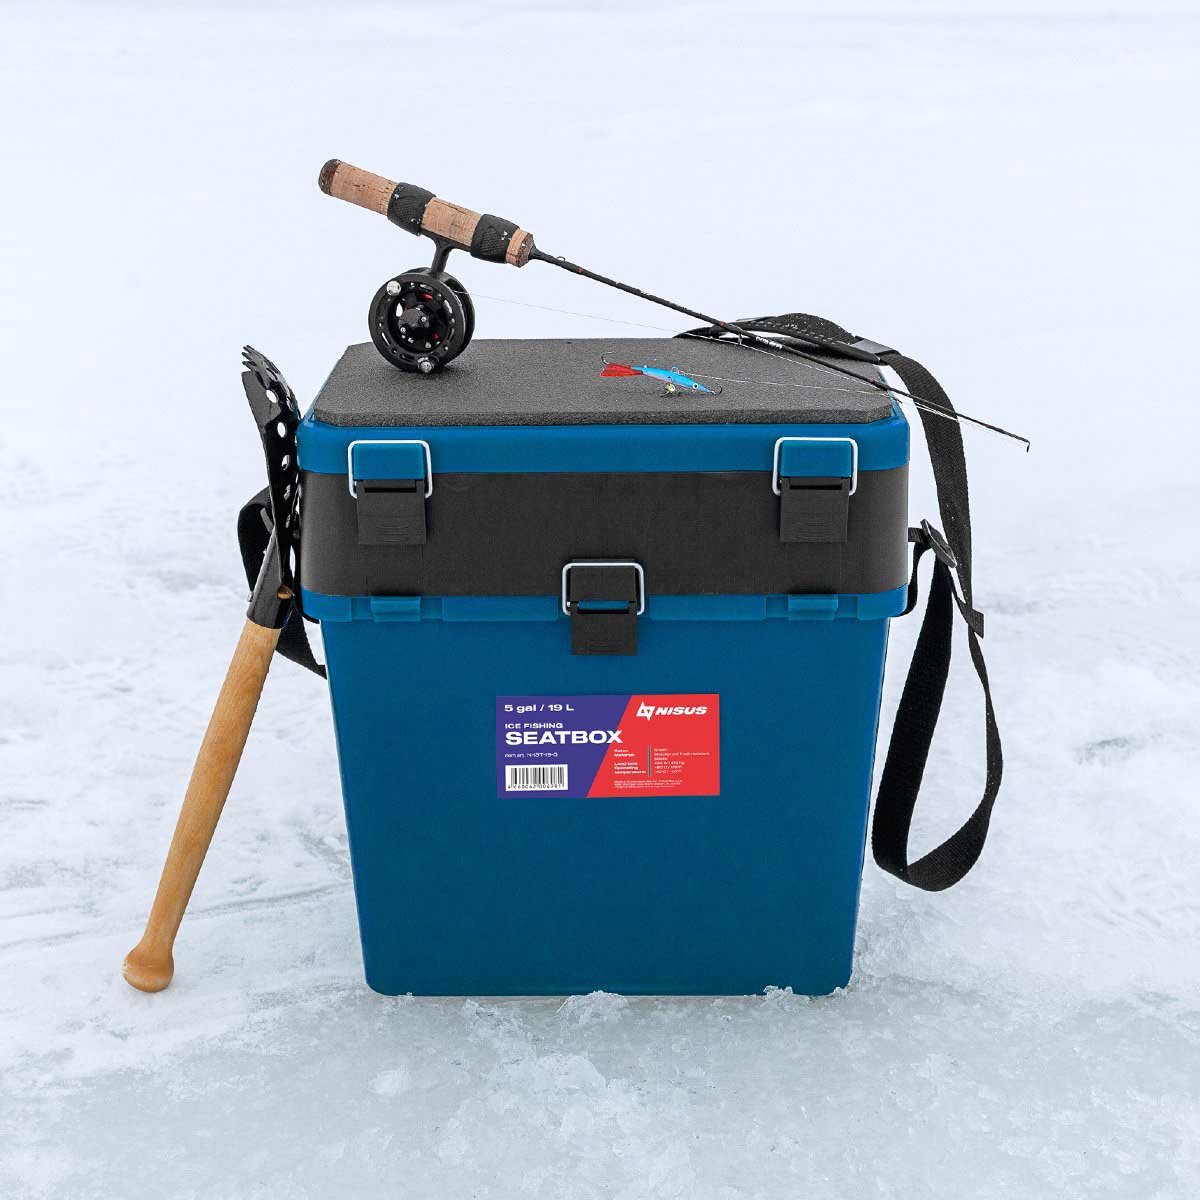 Ice Fishing Bucket Type Box with Seat and Adjustable Shoulder Strap could carry a rod and reel combo and an ice fishing skimmer easily